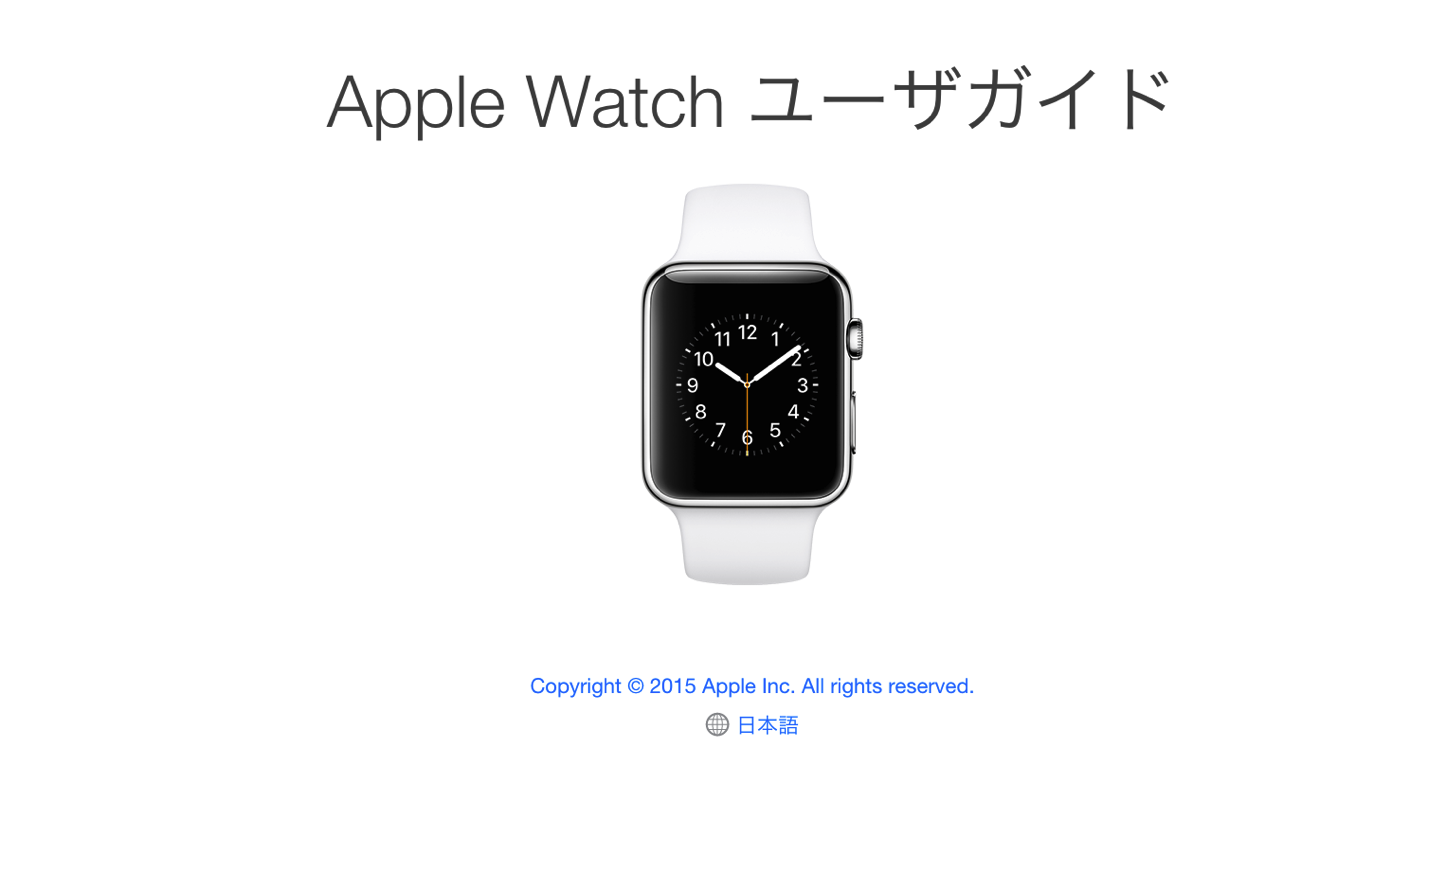 Apple-Watch-User-Guide.png